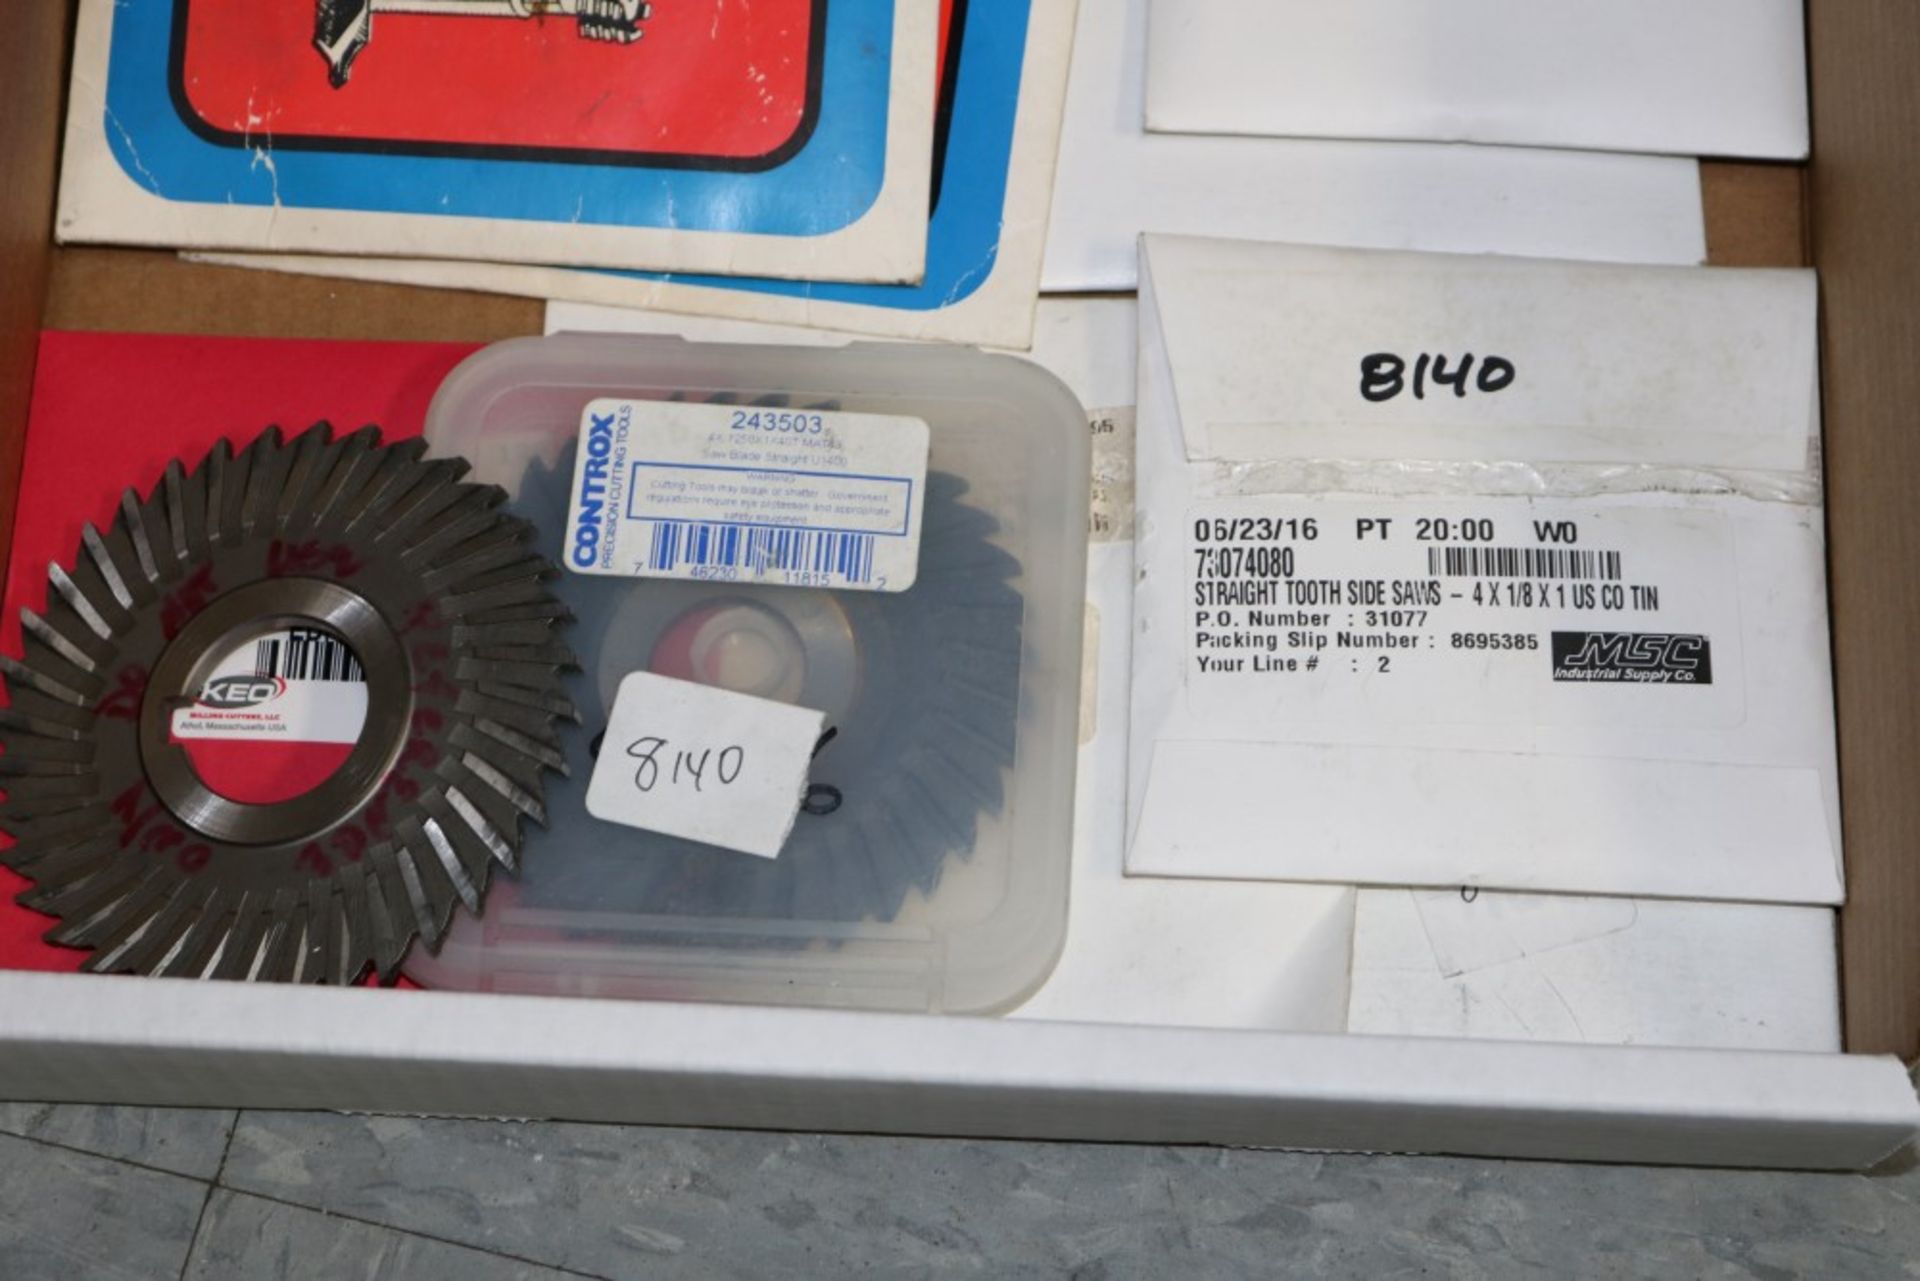 NEW Assorted Perishable Tooling, Saws (See Photos for Specific Tooling Details) - Image 2 of 5